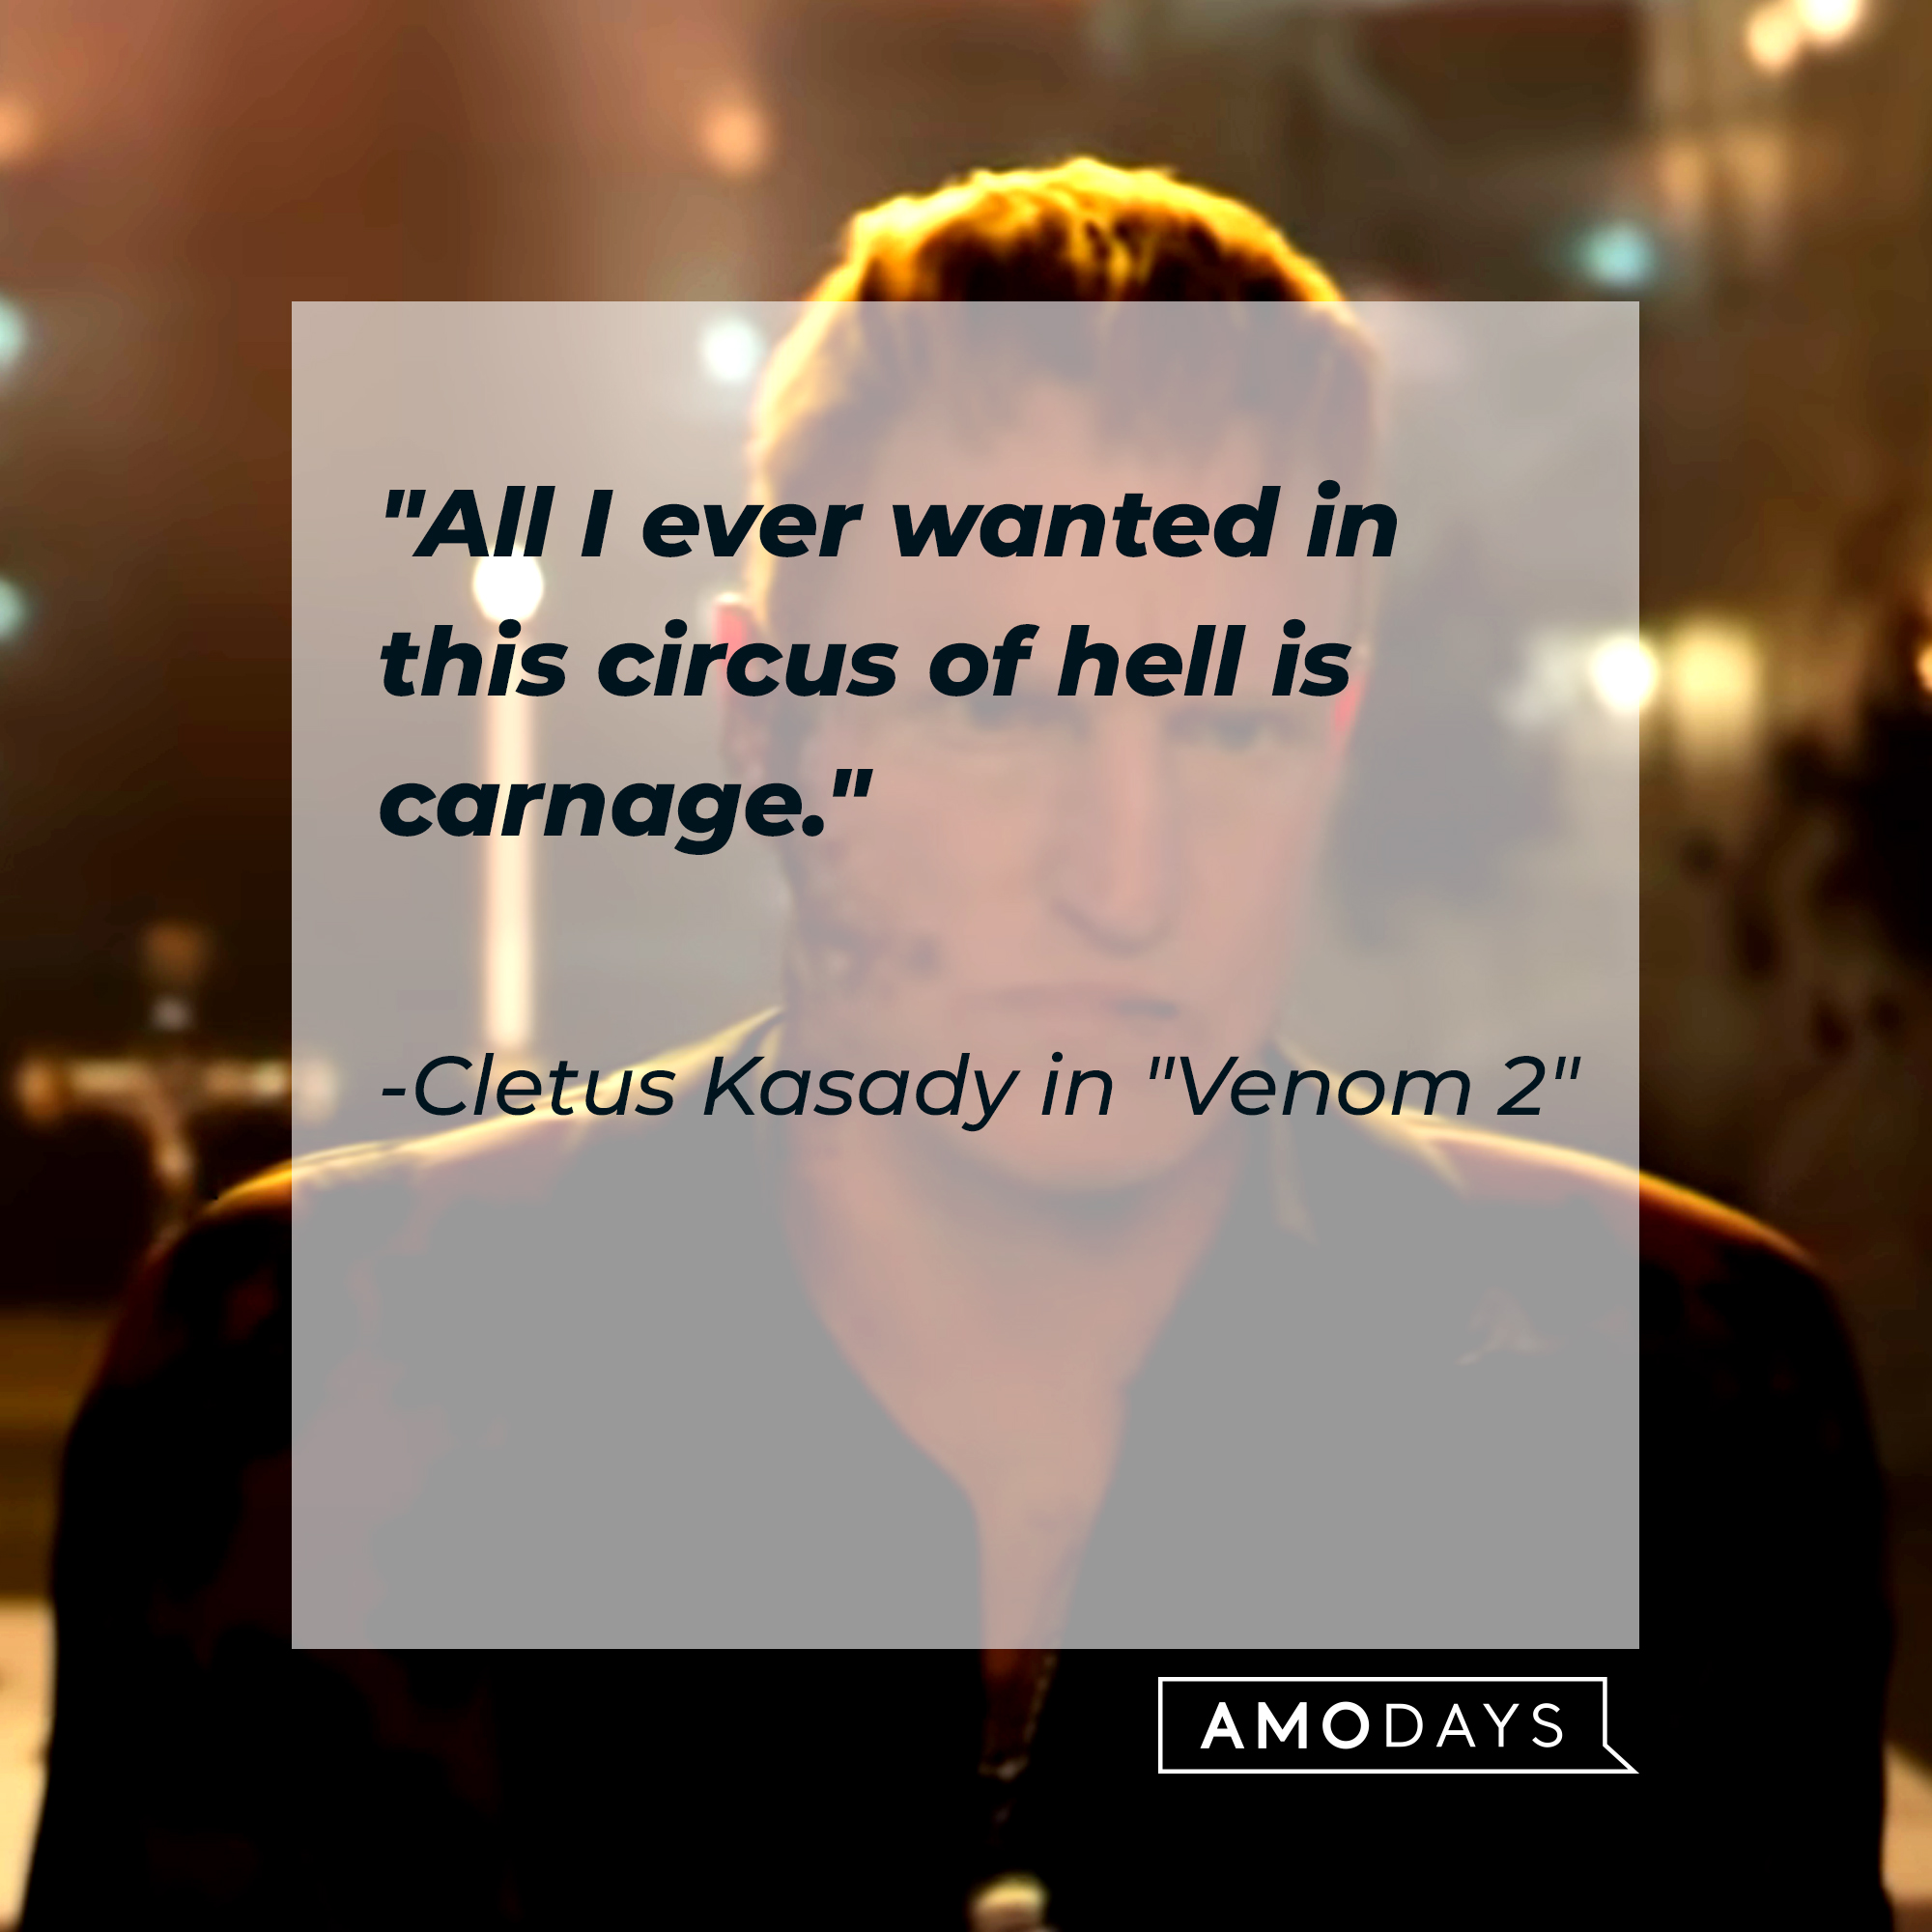 Cletus Kasady with his quote, "All I ever wanted in this circus of hell is carnage." | Source: YouTube/sonypictures